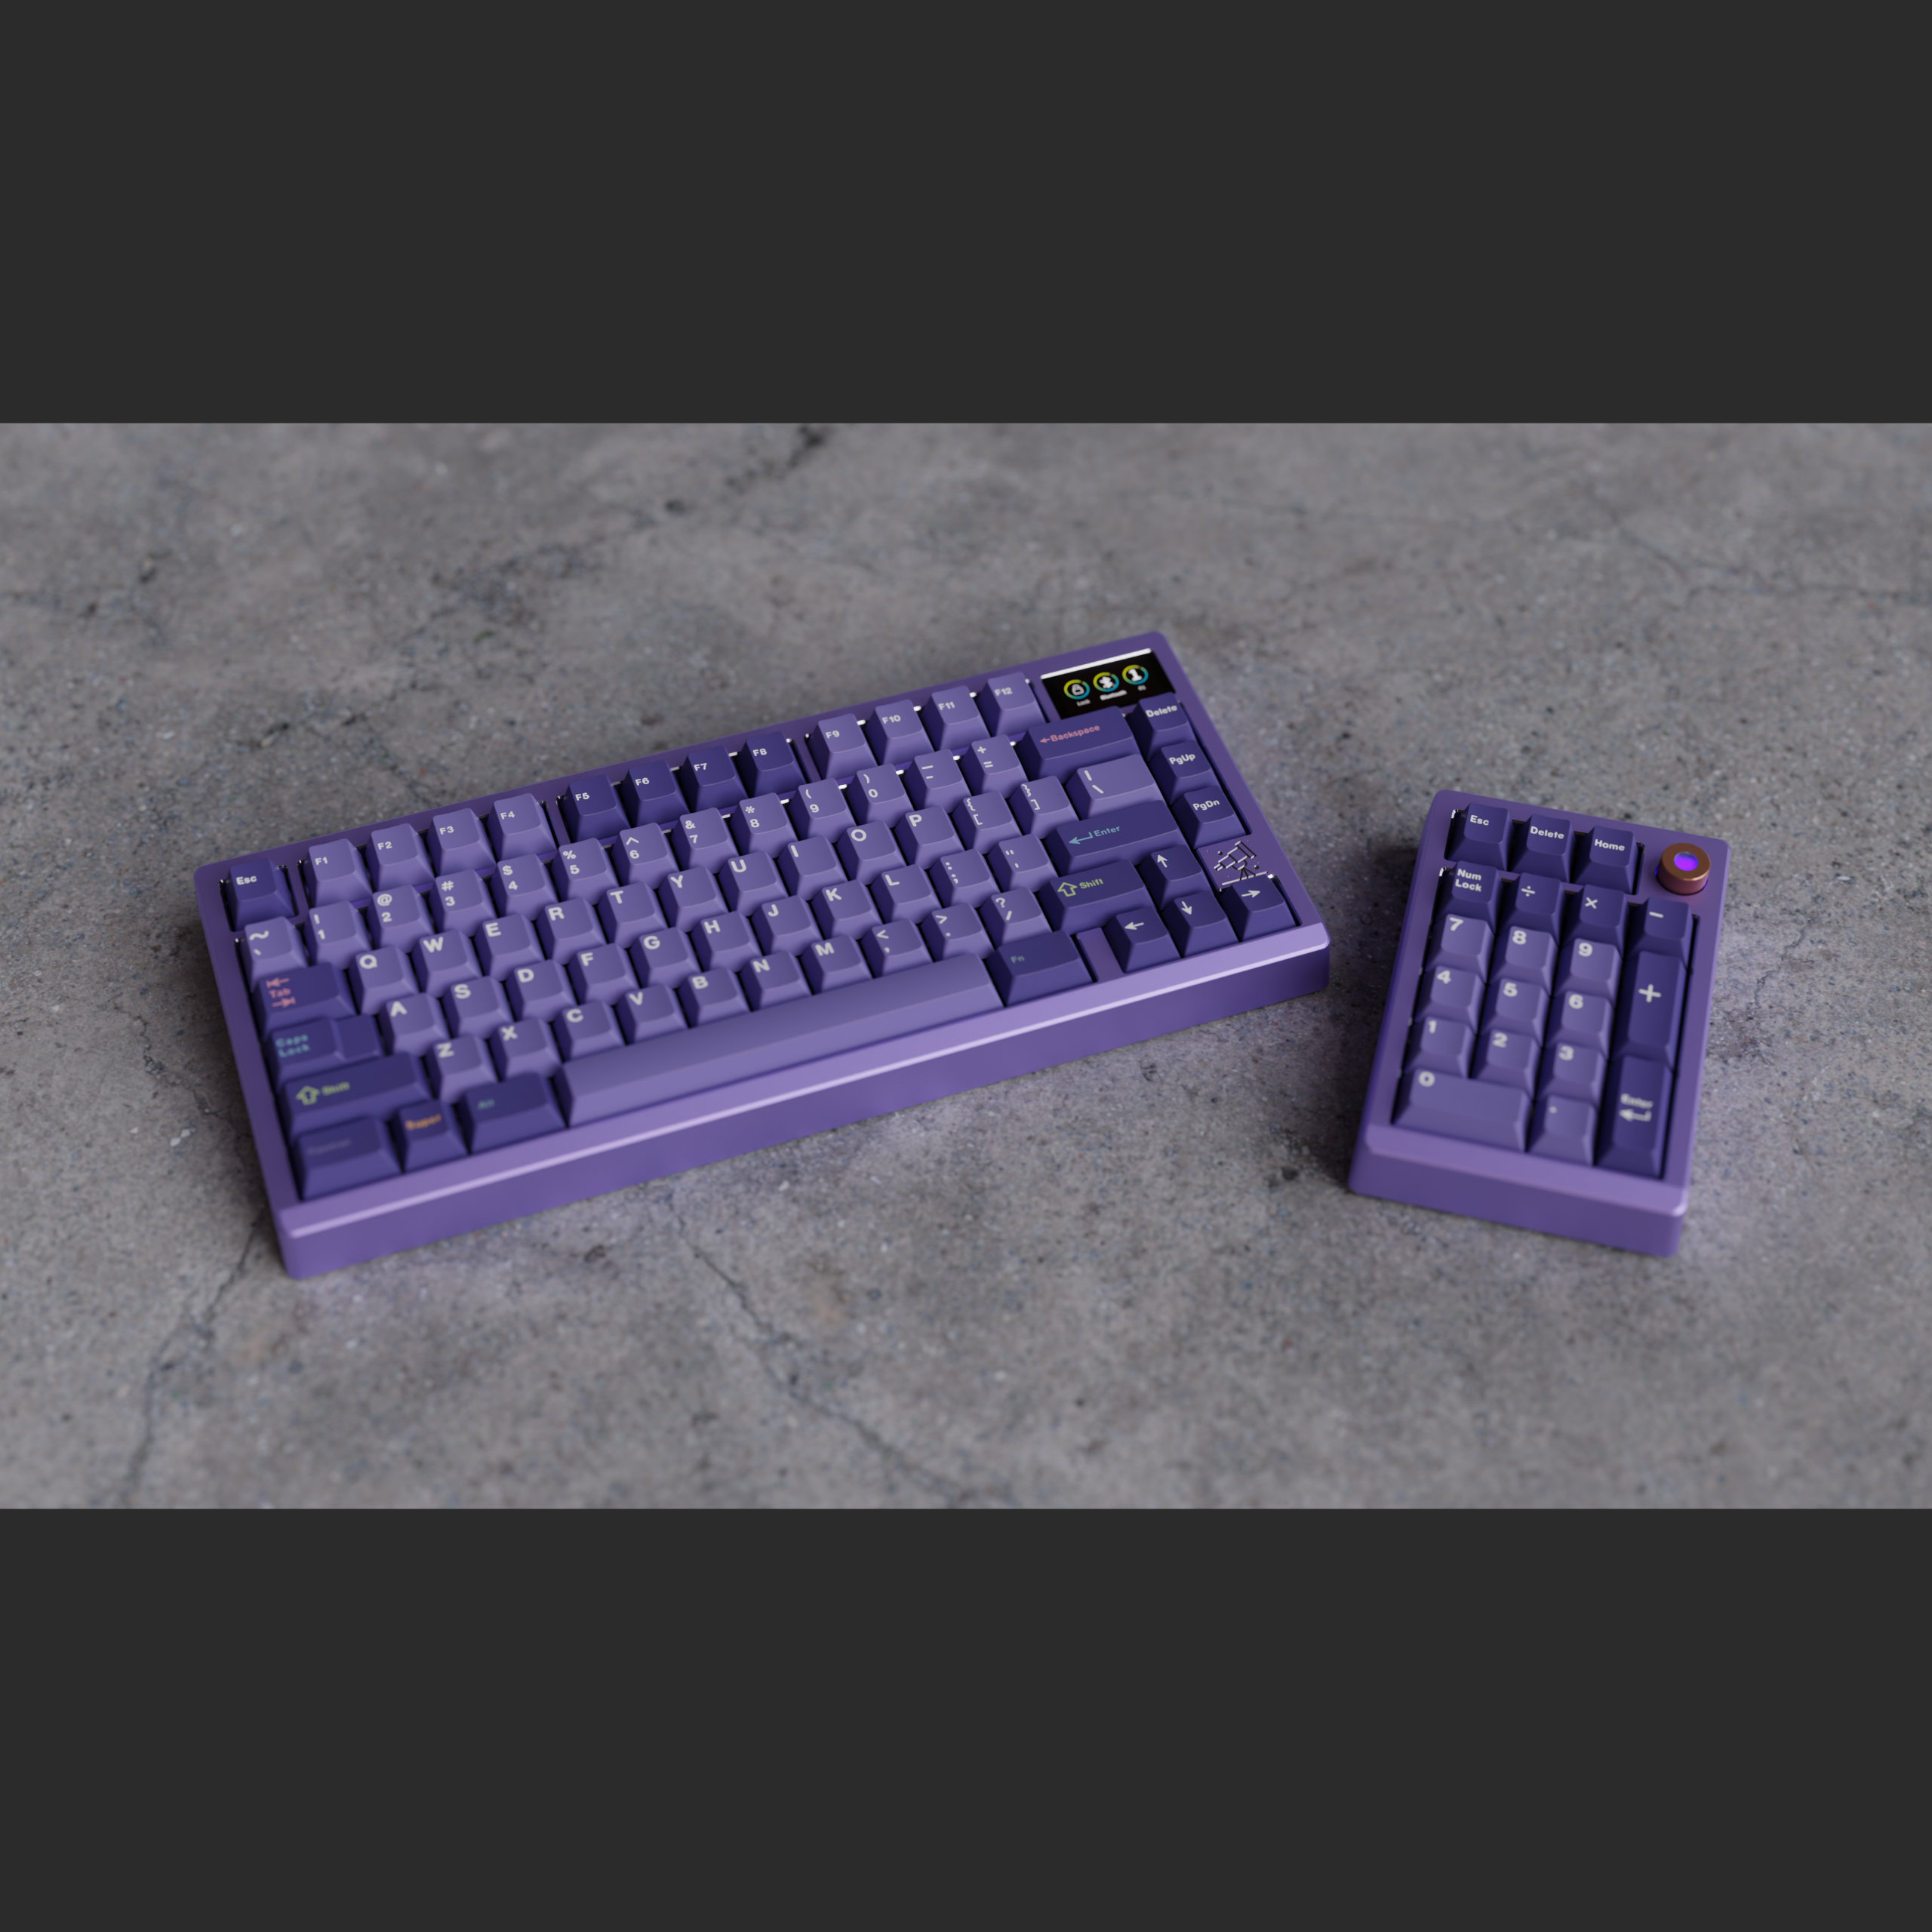 ZoomPad Special Edition - Anodized Lavender